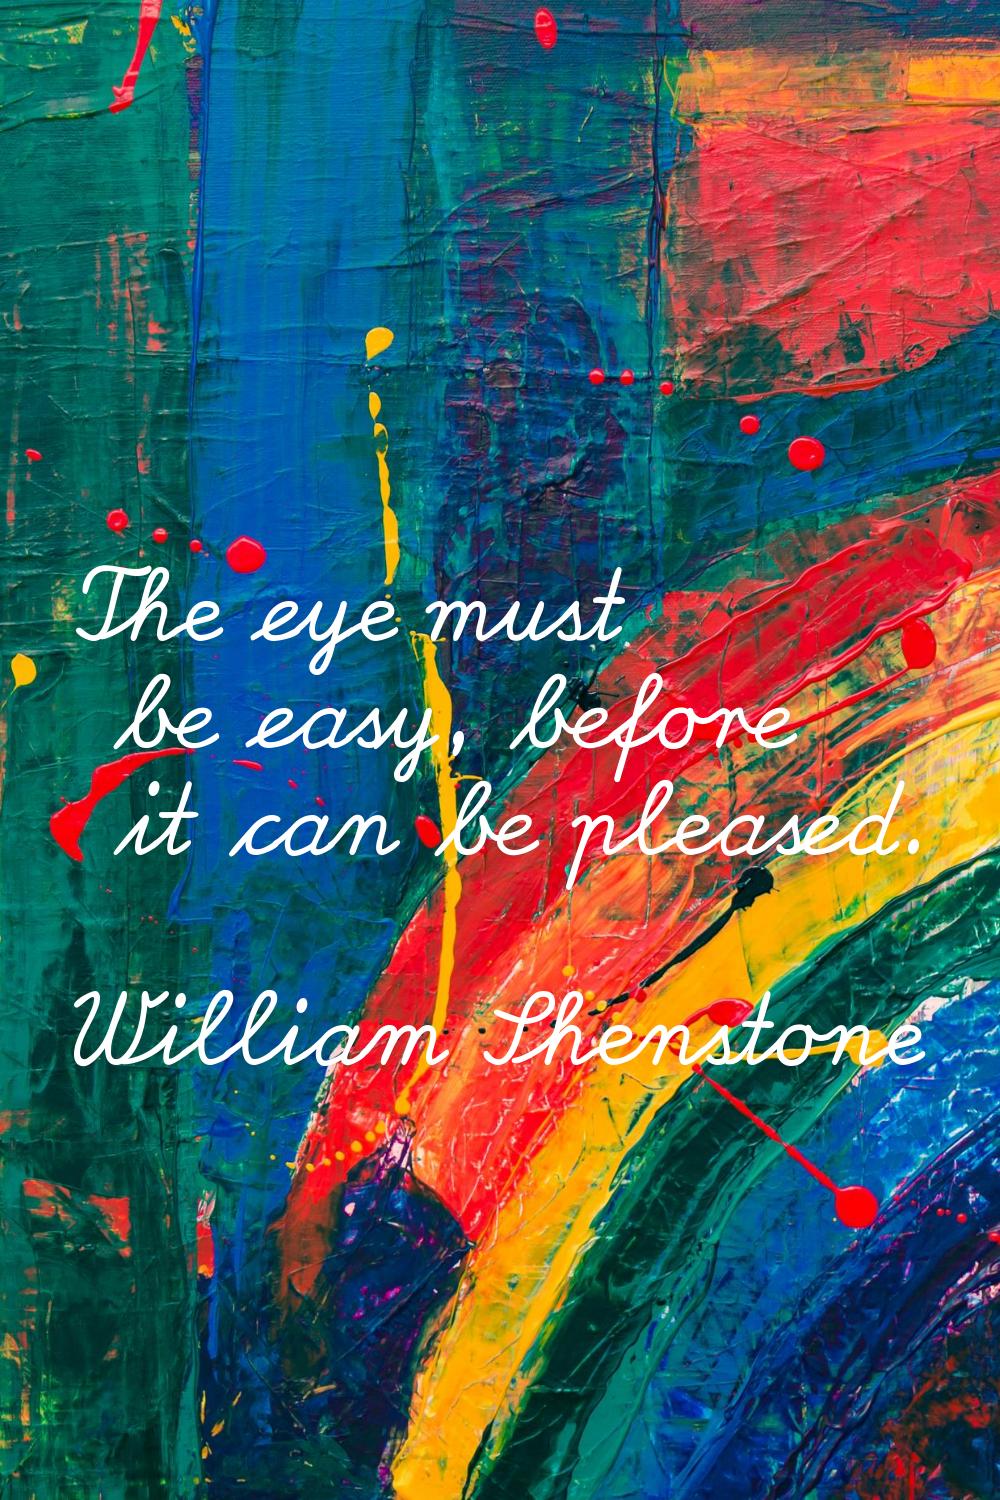 The eye must be easy, before it can be pleased.